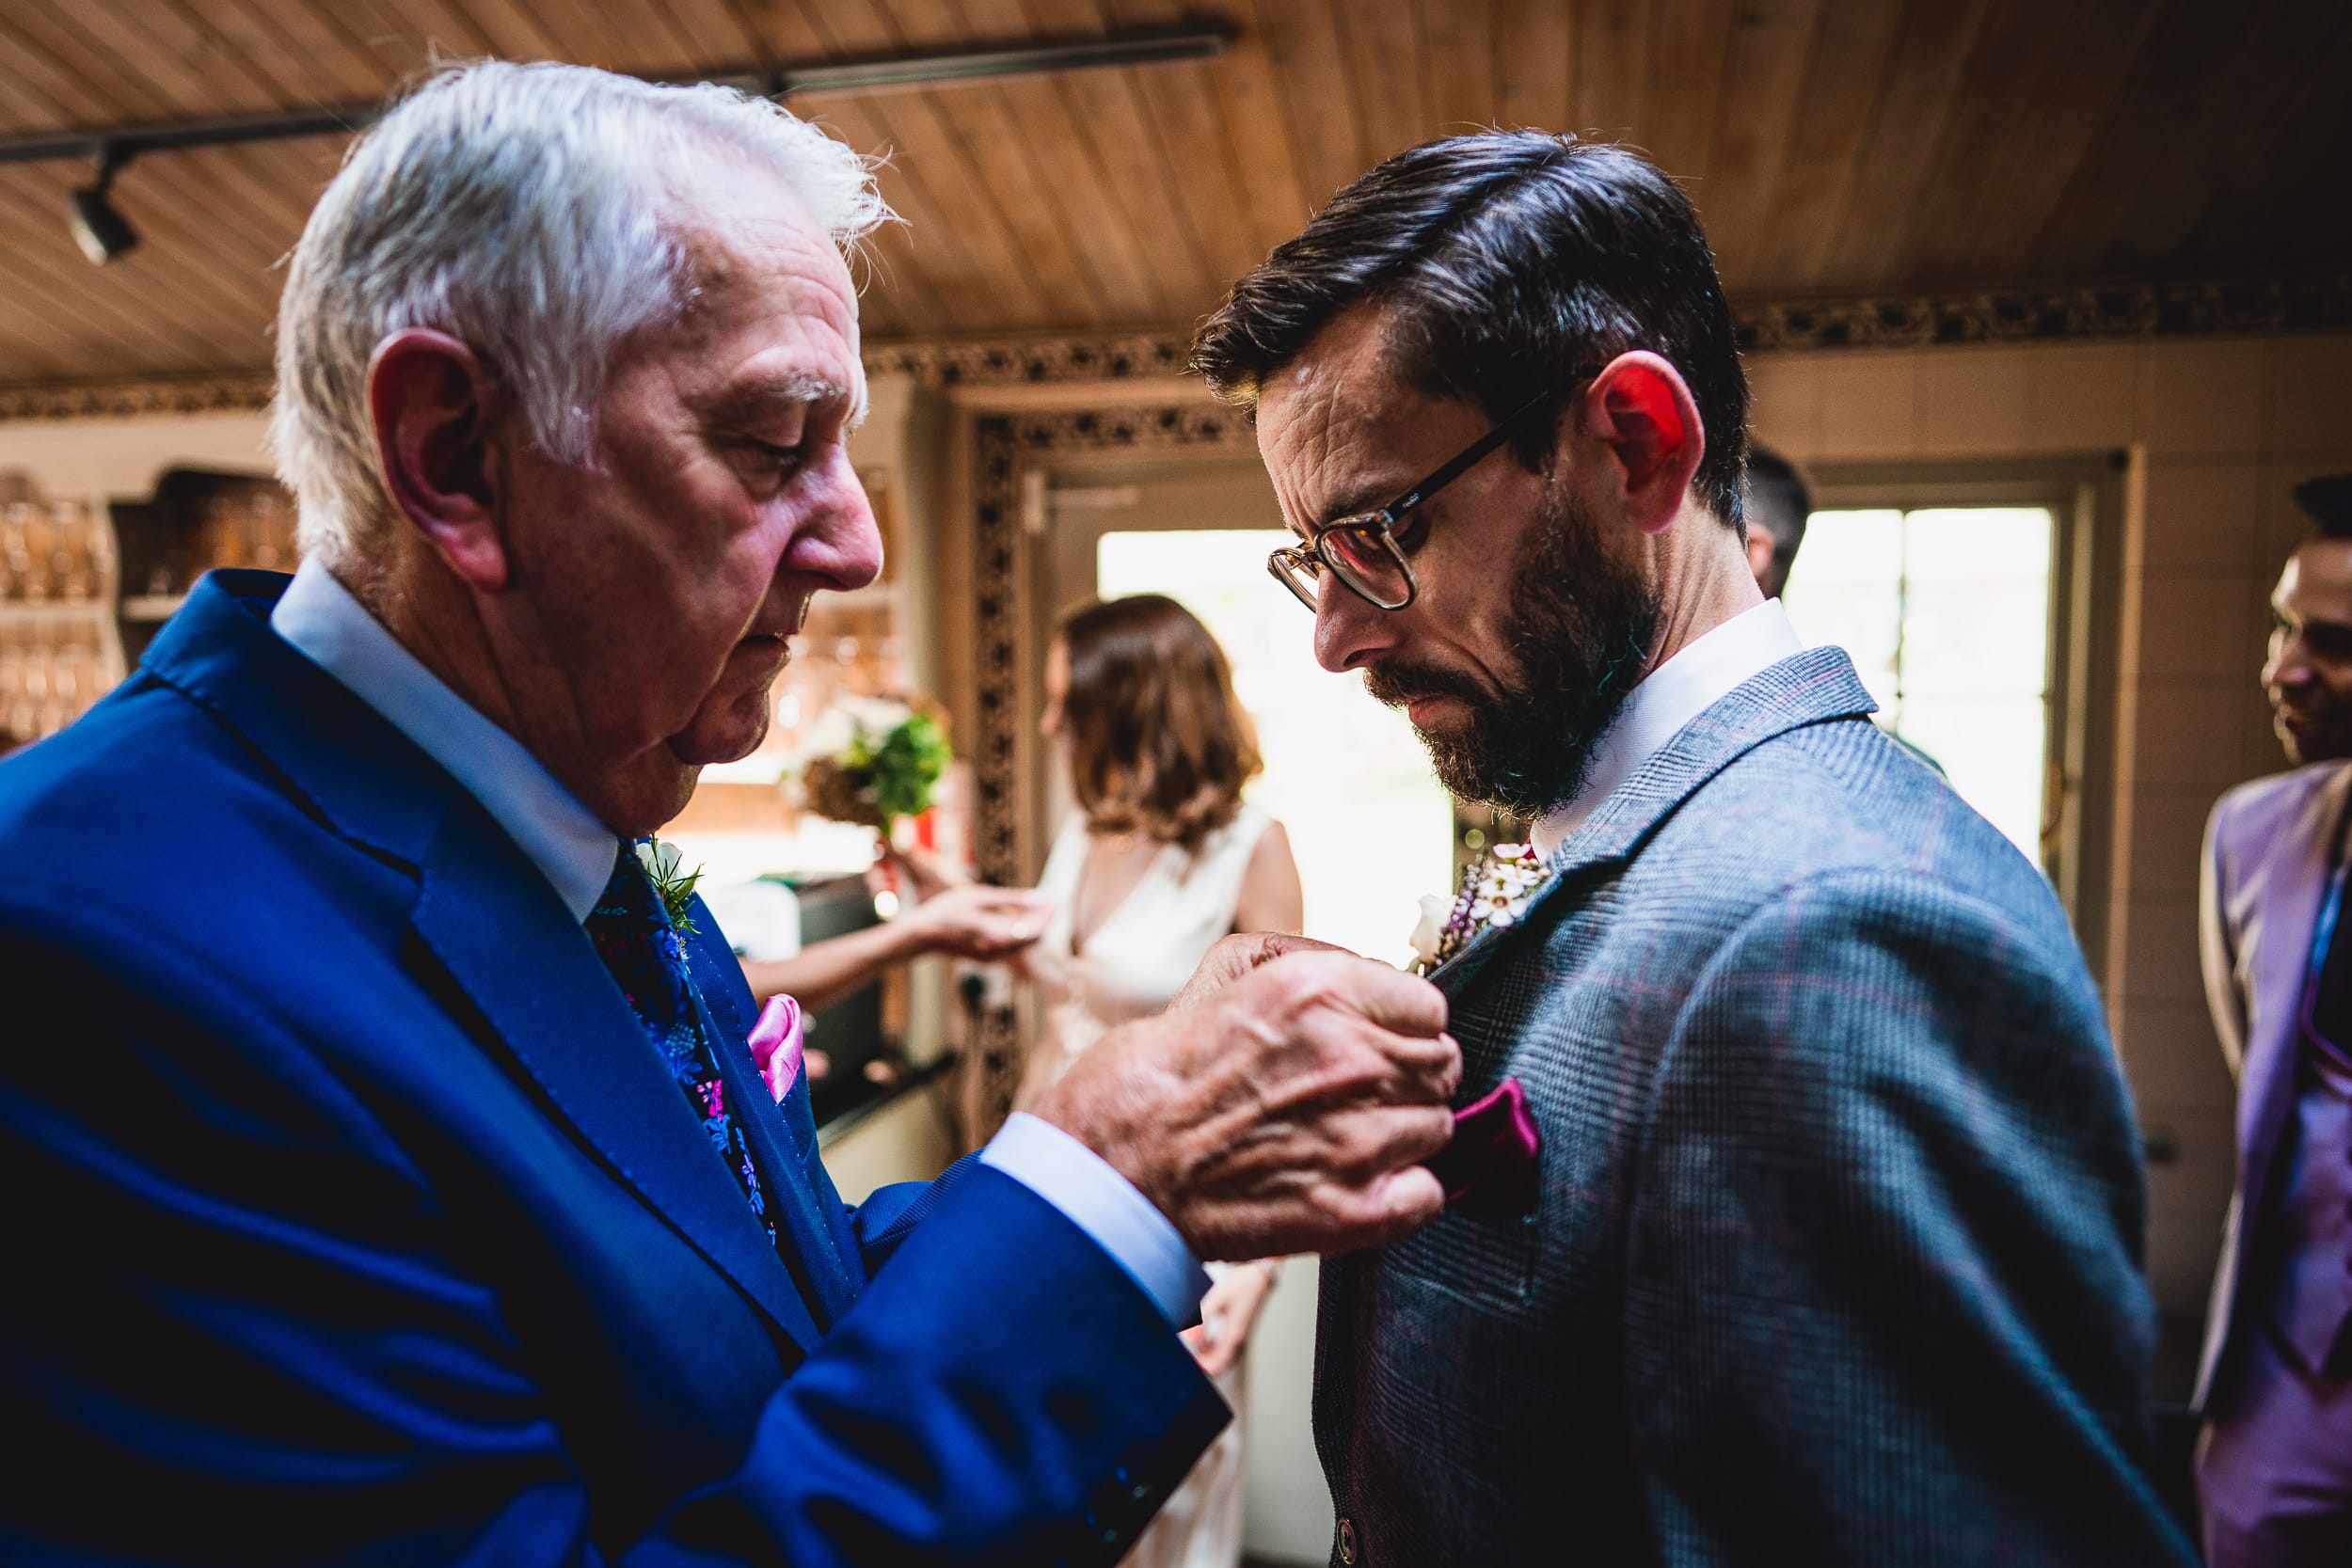 A man in a suit adjusts another man's tie at a Surrey Wedding.